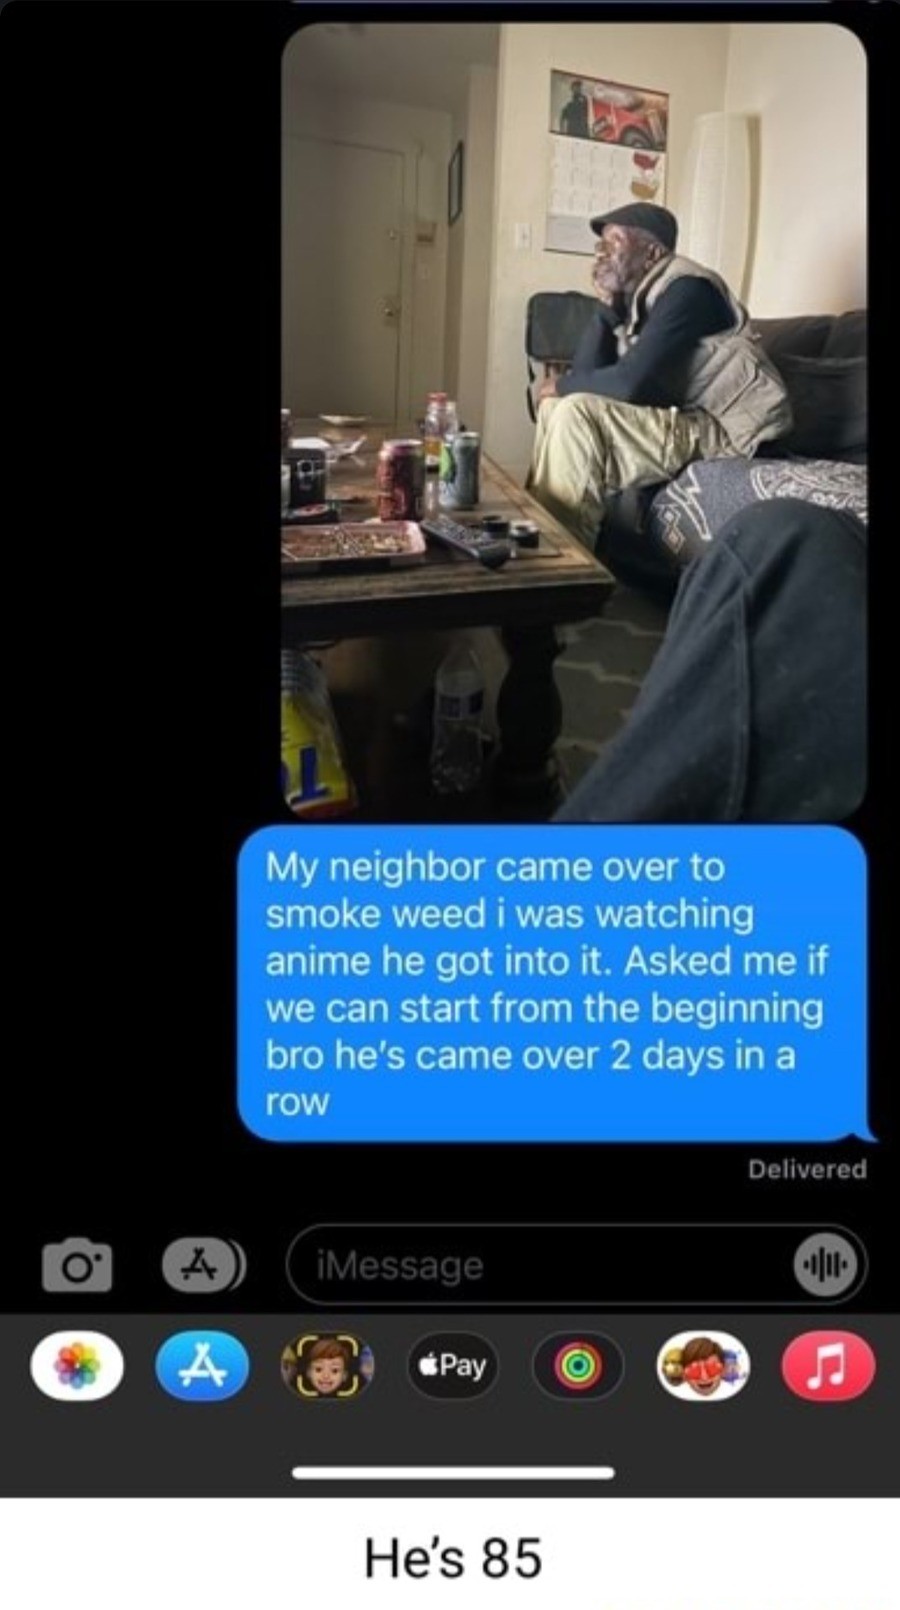 promising Wildcat. .. I mean, if you guys are friendly enough to smoke weed together watching anime is clearly the next step